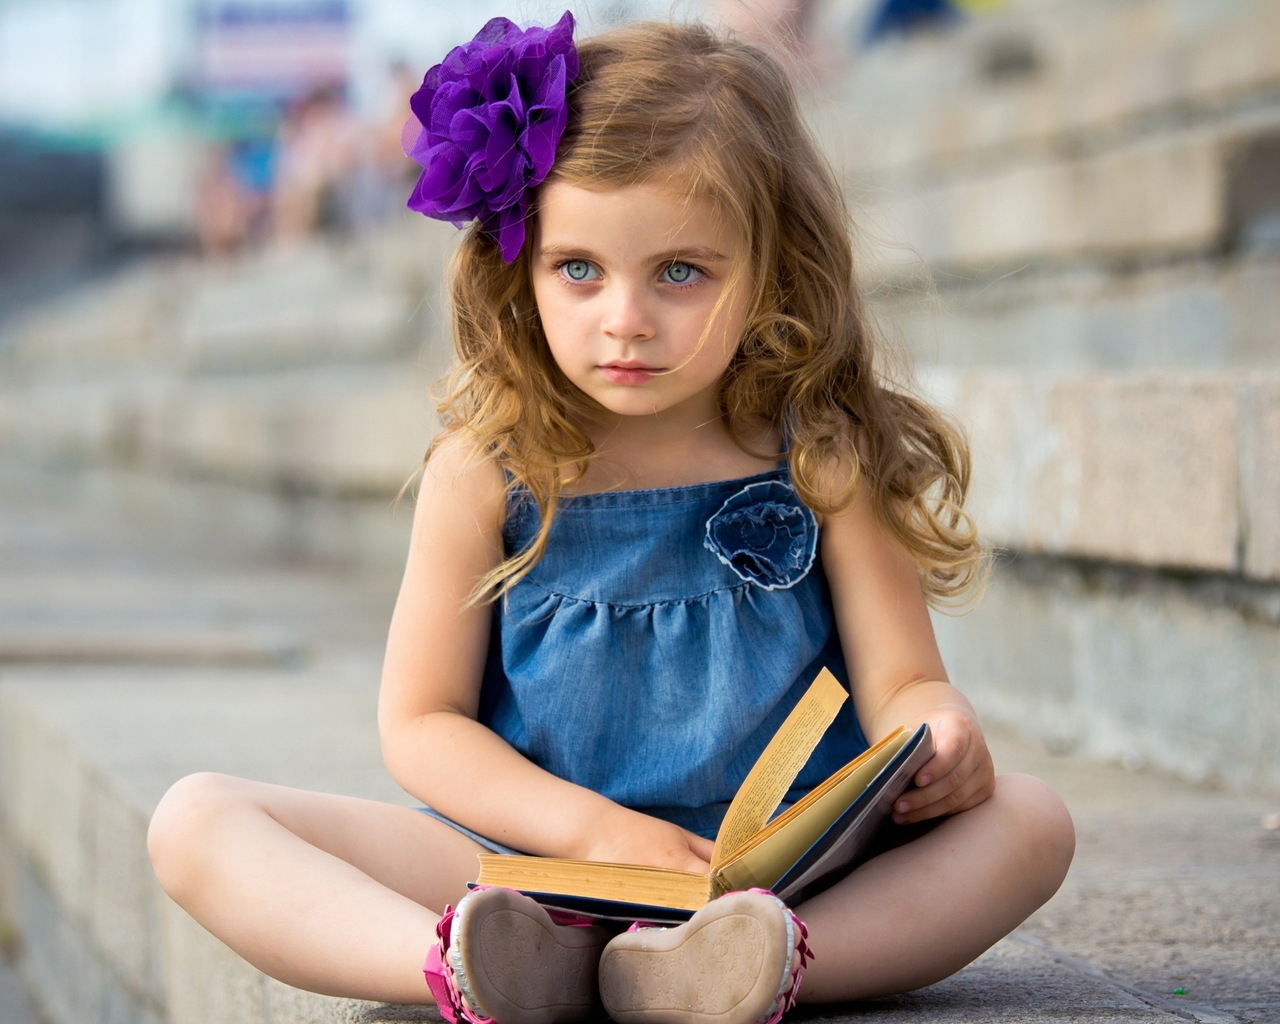 Cute Little Girl for 1280 x 1024 resolution